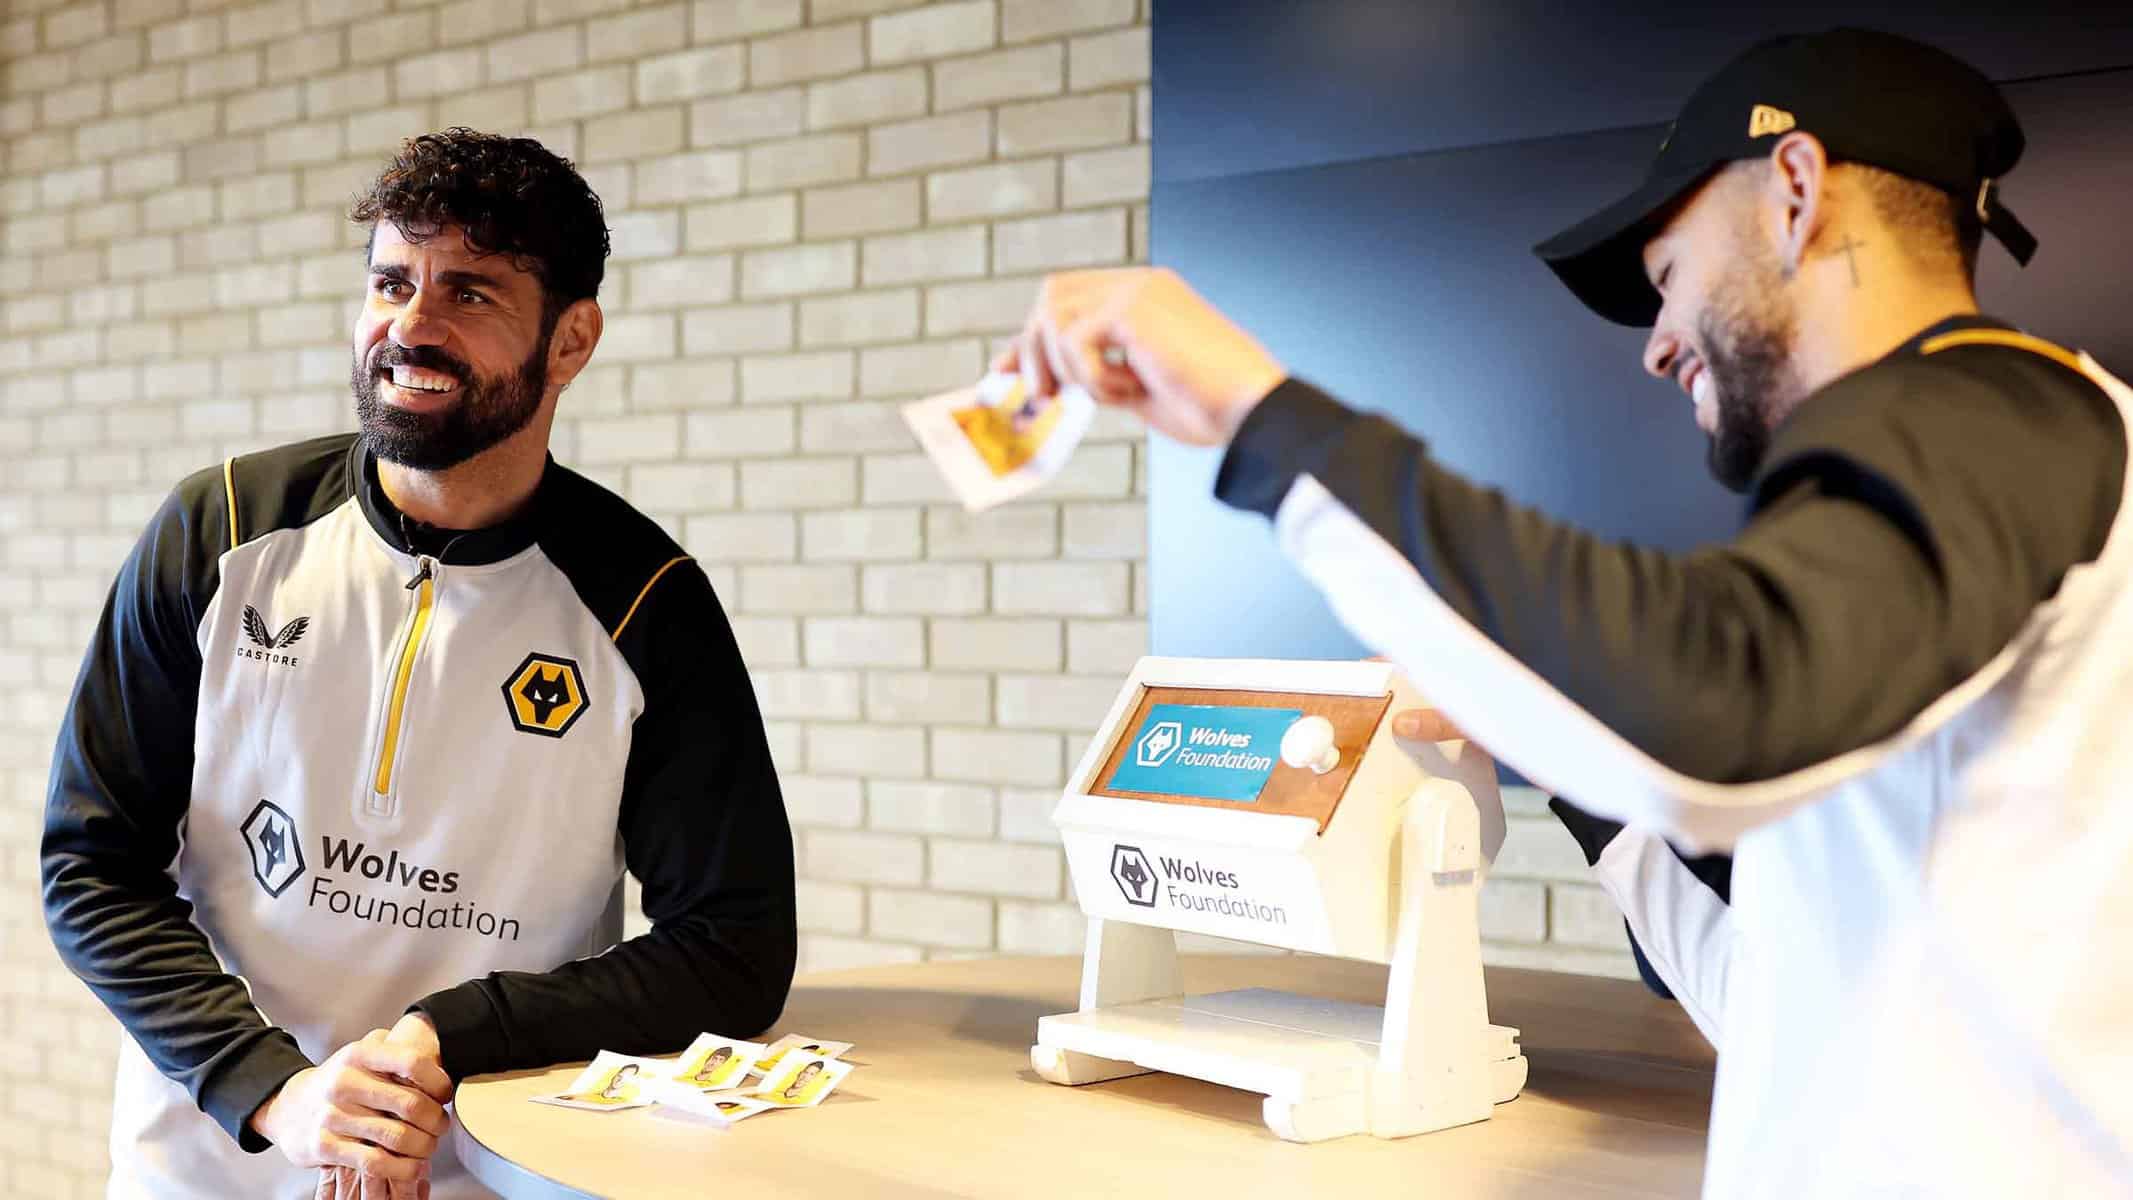 Costa and Cunha take on ‘Player Bingo’ with Wolves Foundation Image